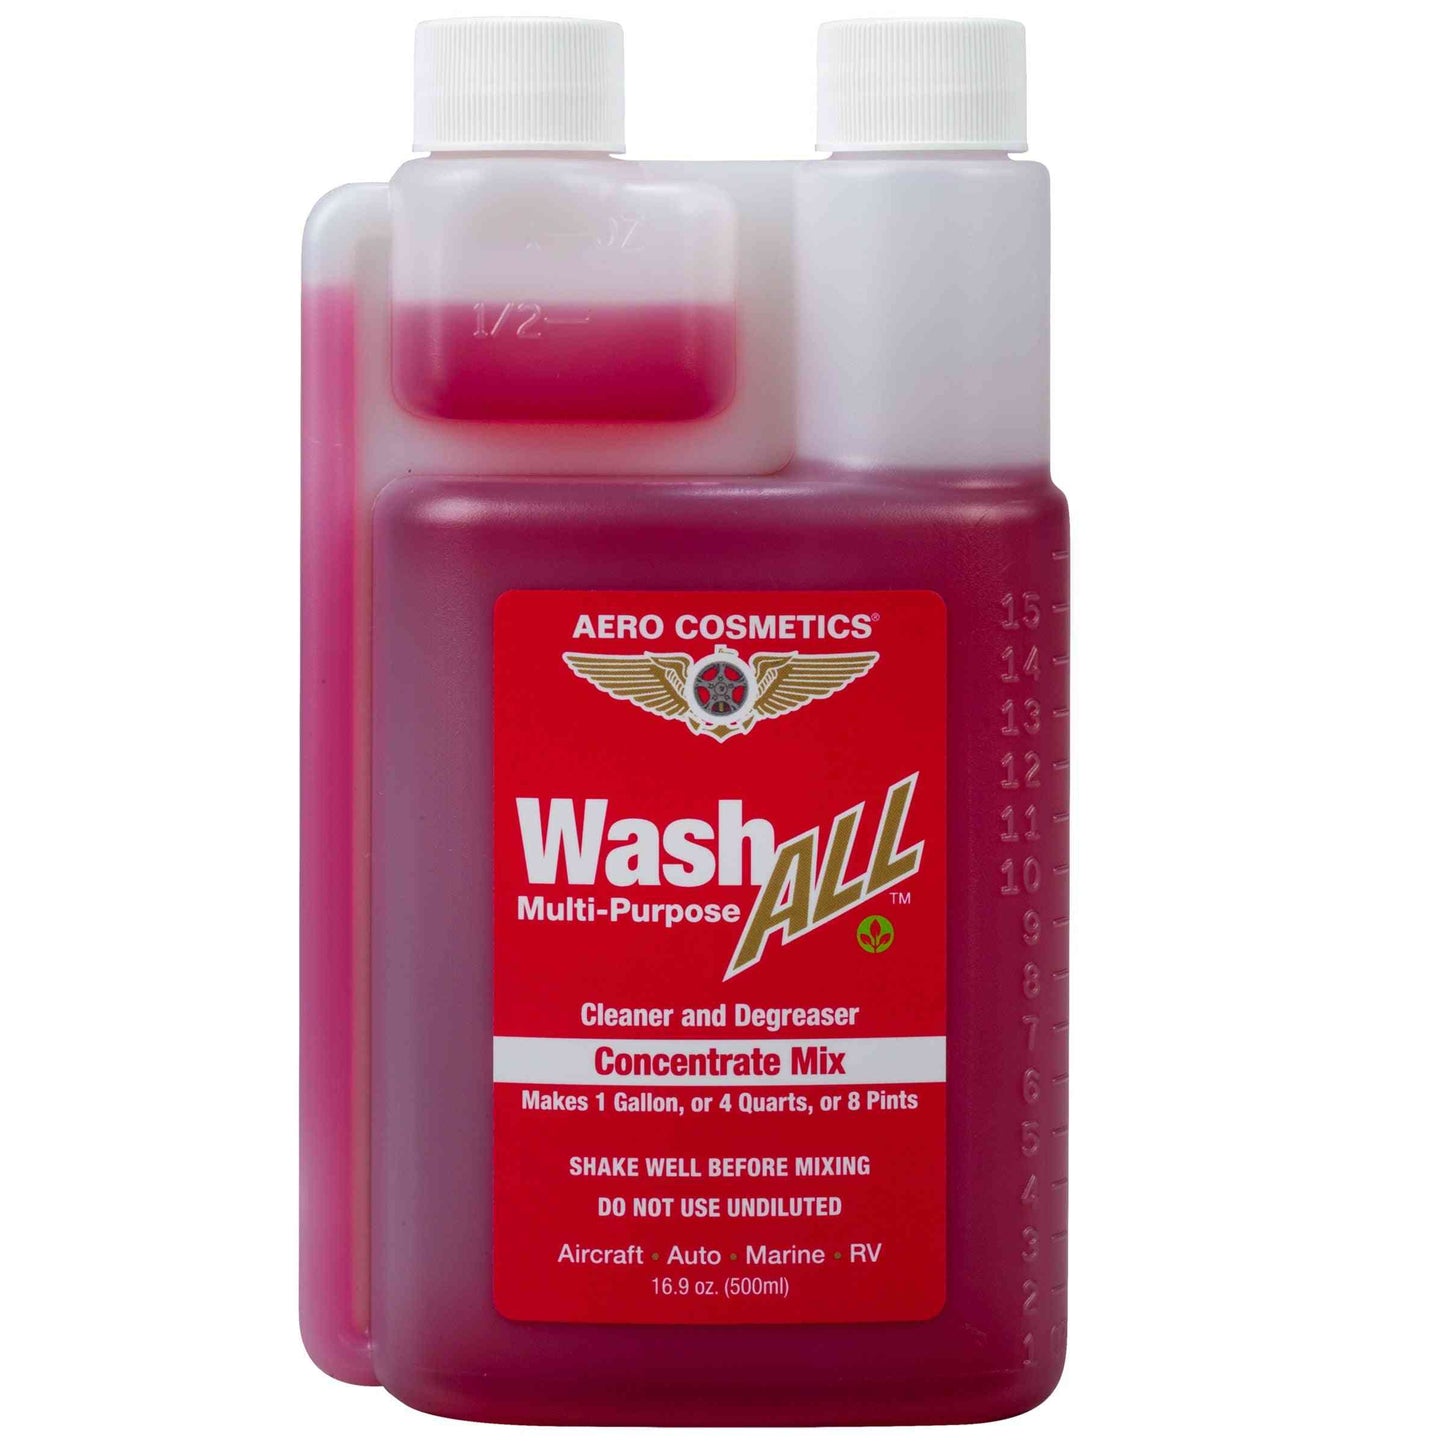 Wash ALL Degreaser Concentrate 16 Fl. oz  [Makes 1 Gallon] - Multi-Purpose Cleaner and Degreaser